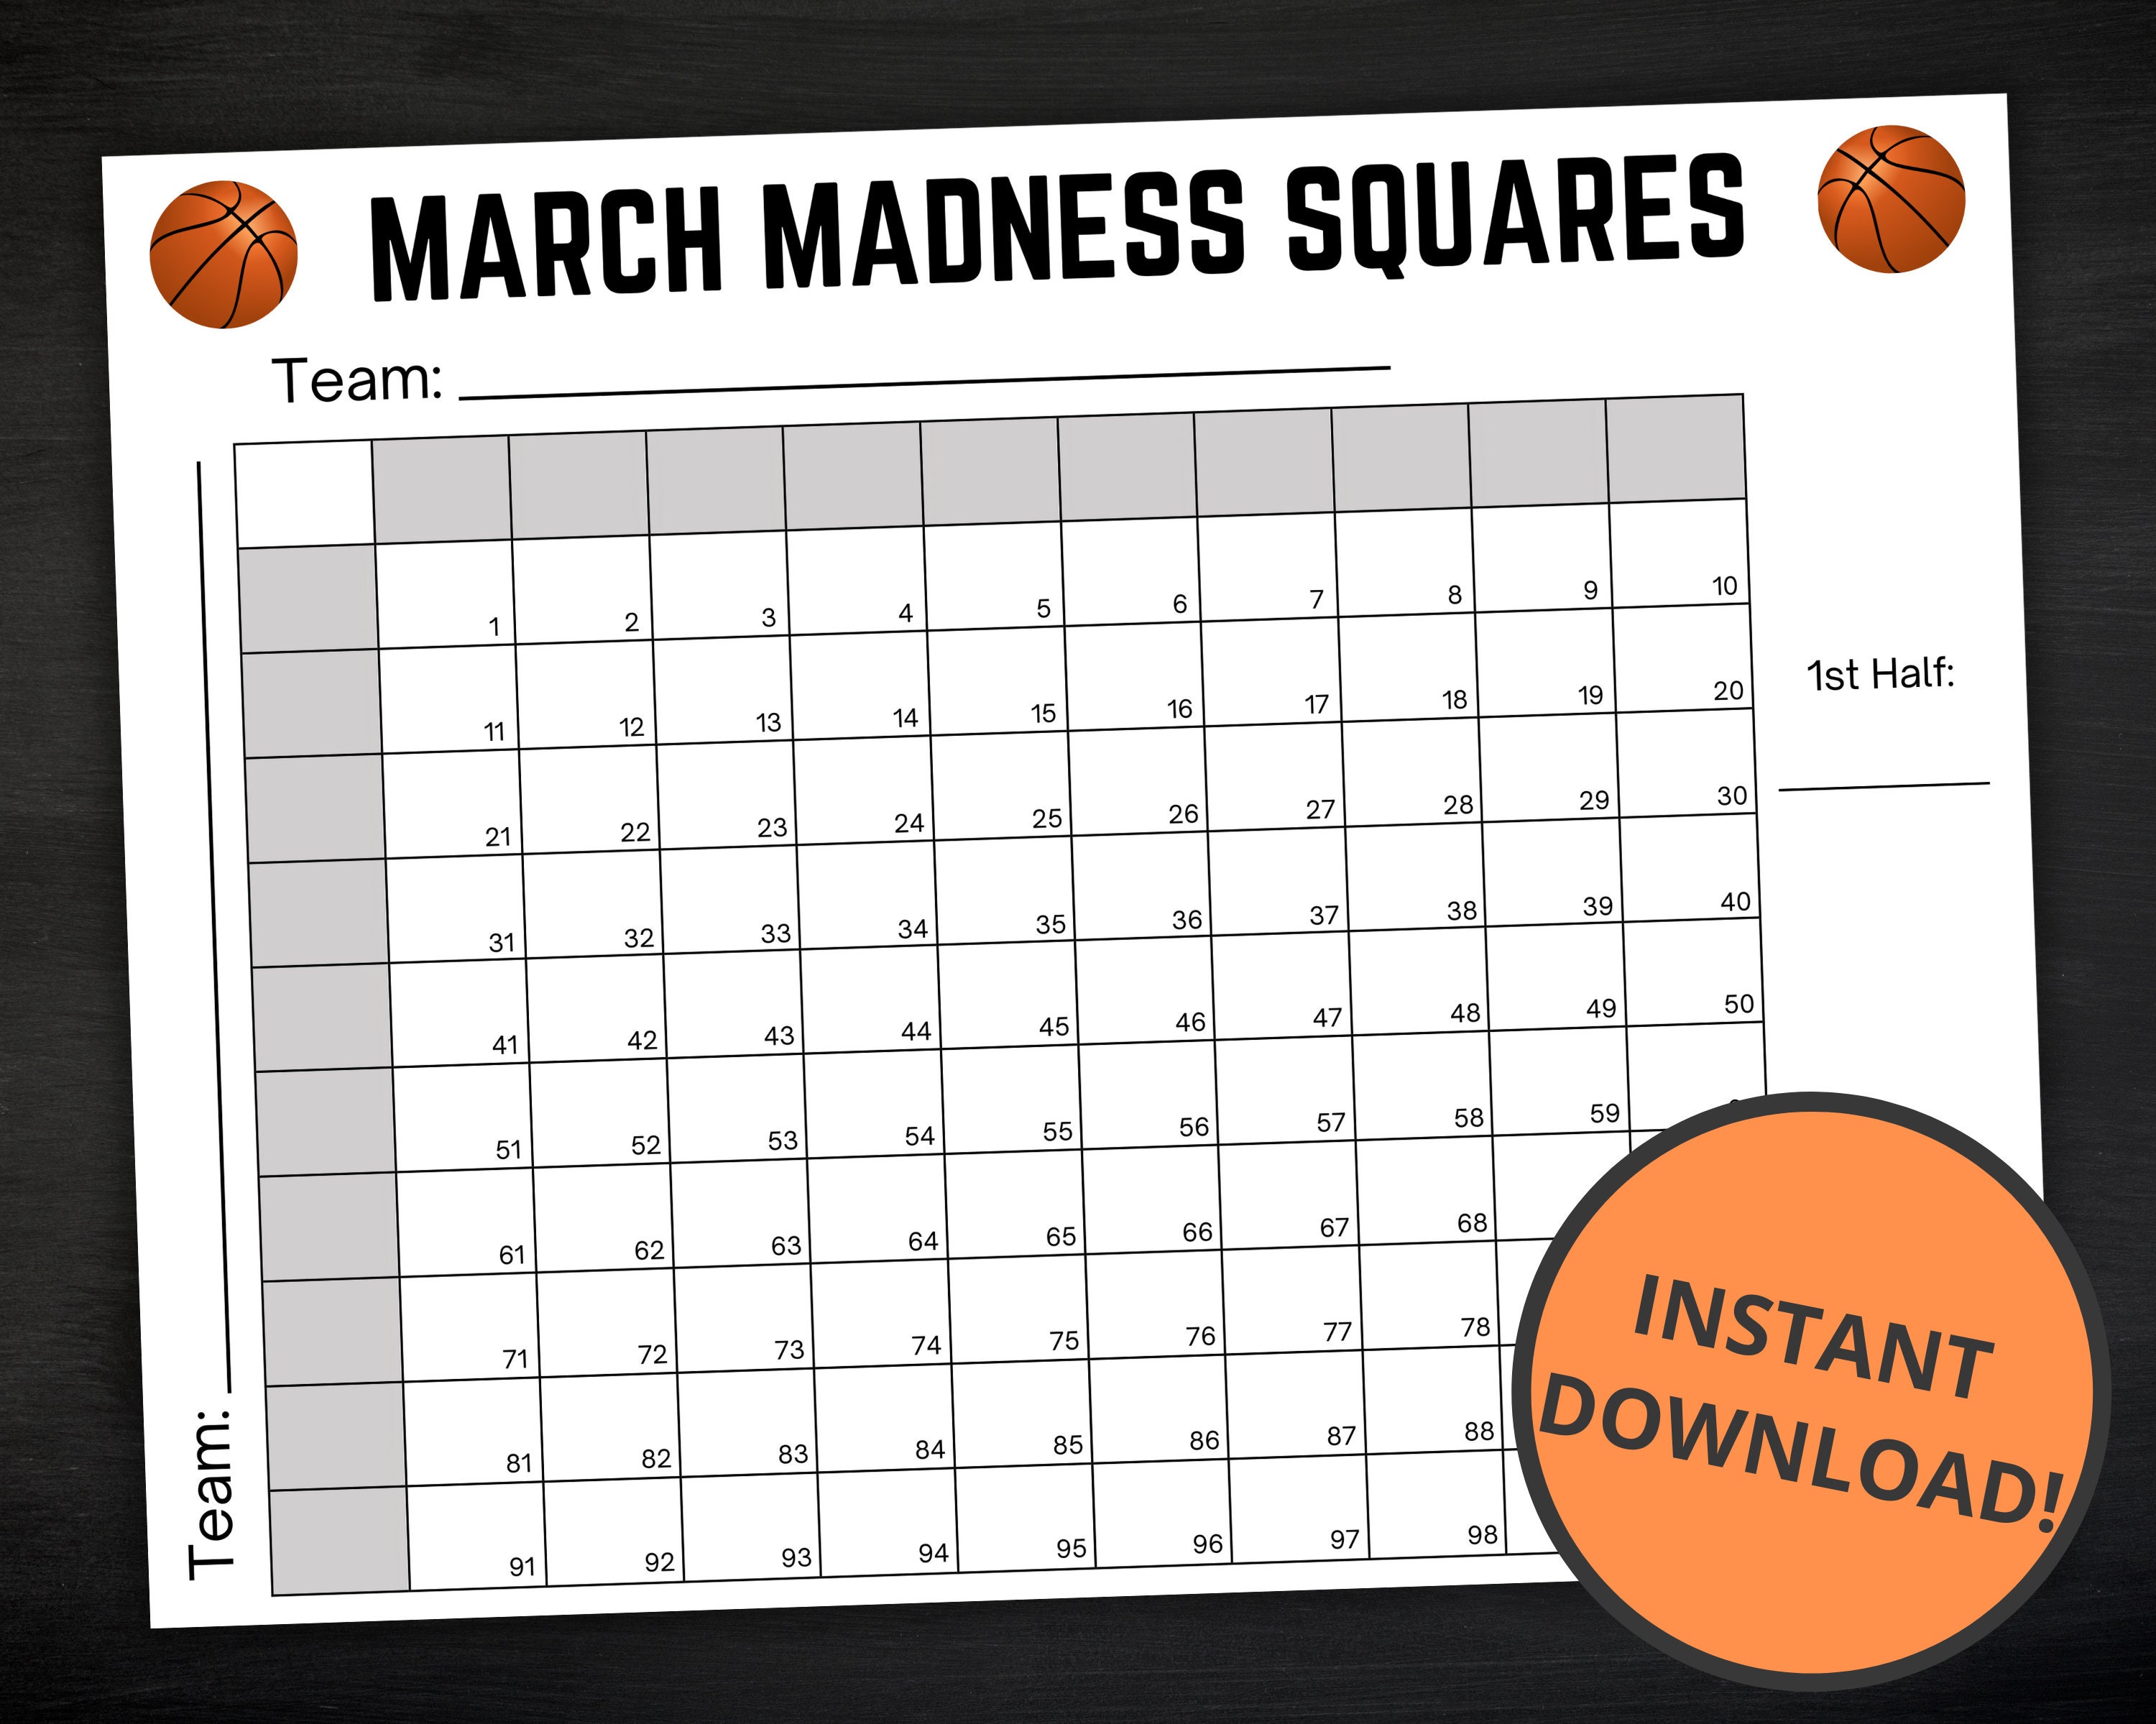 March Madness Squares Template